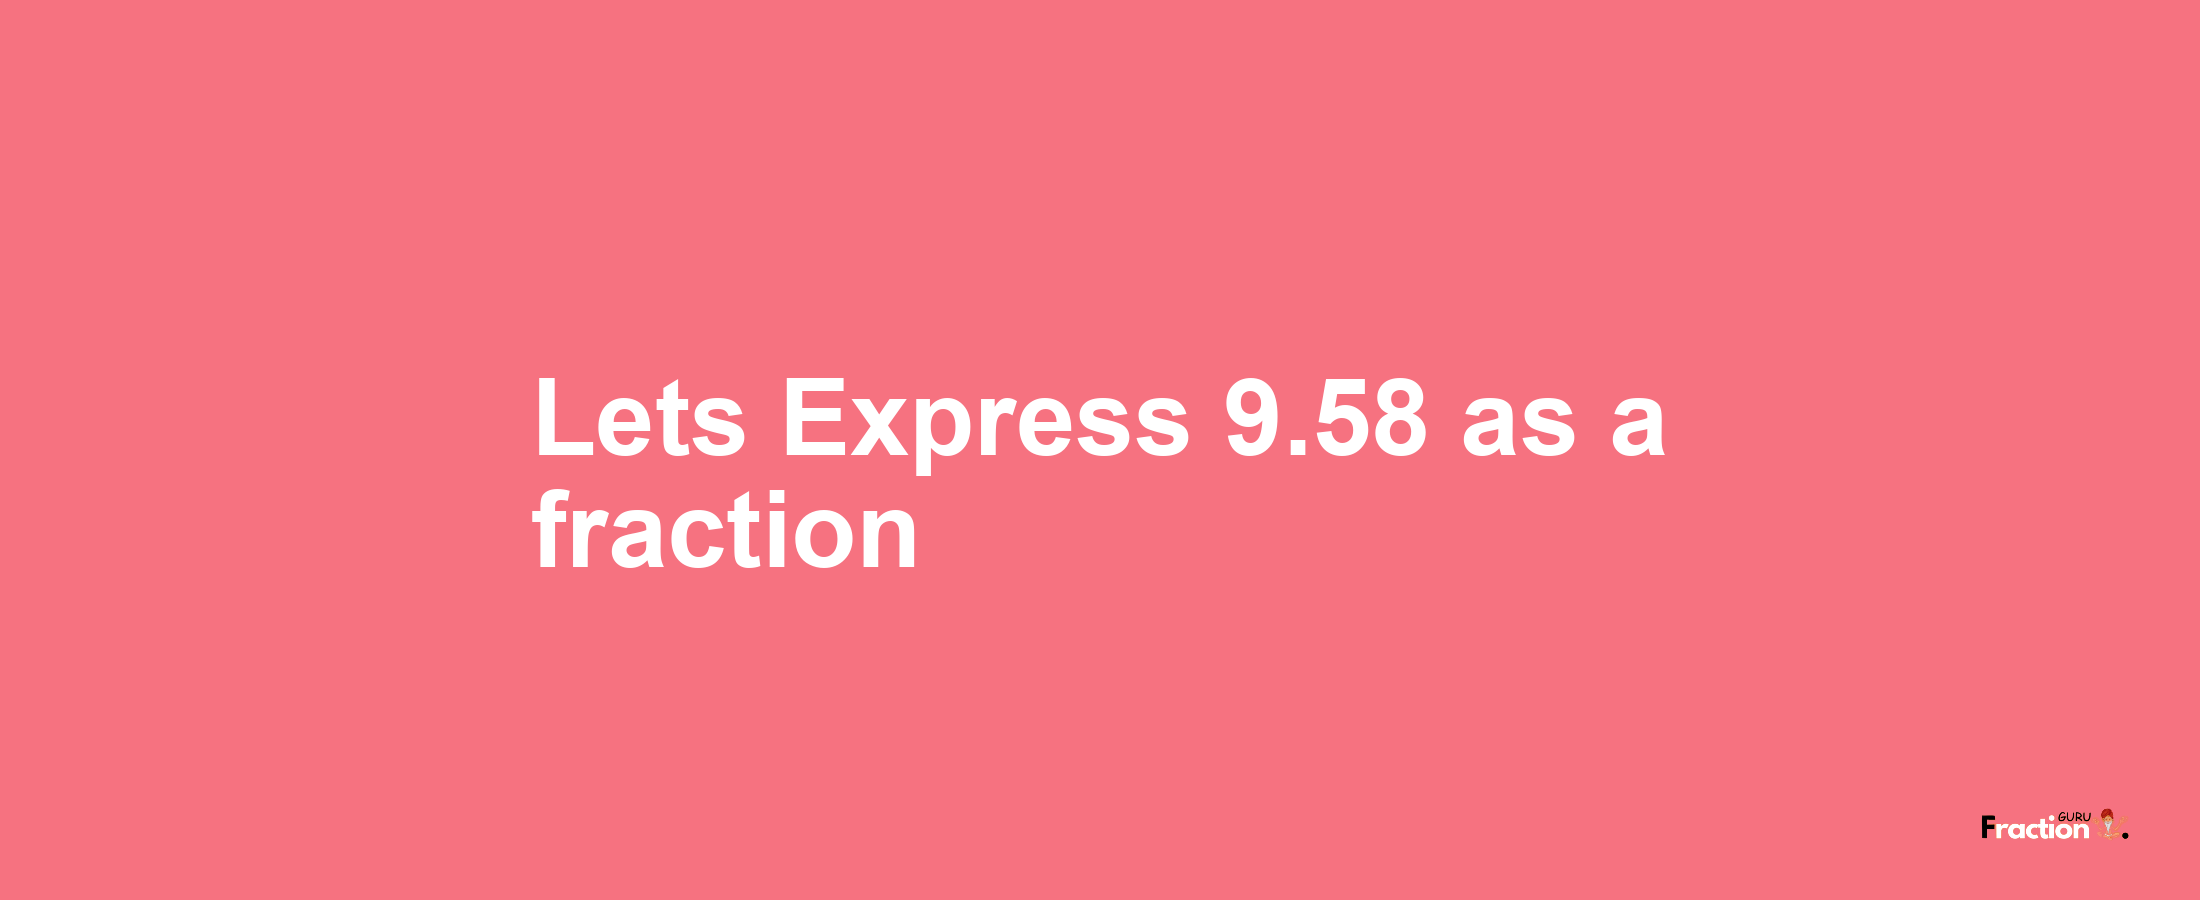 Lets Express 9.58 as afraction